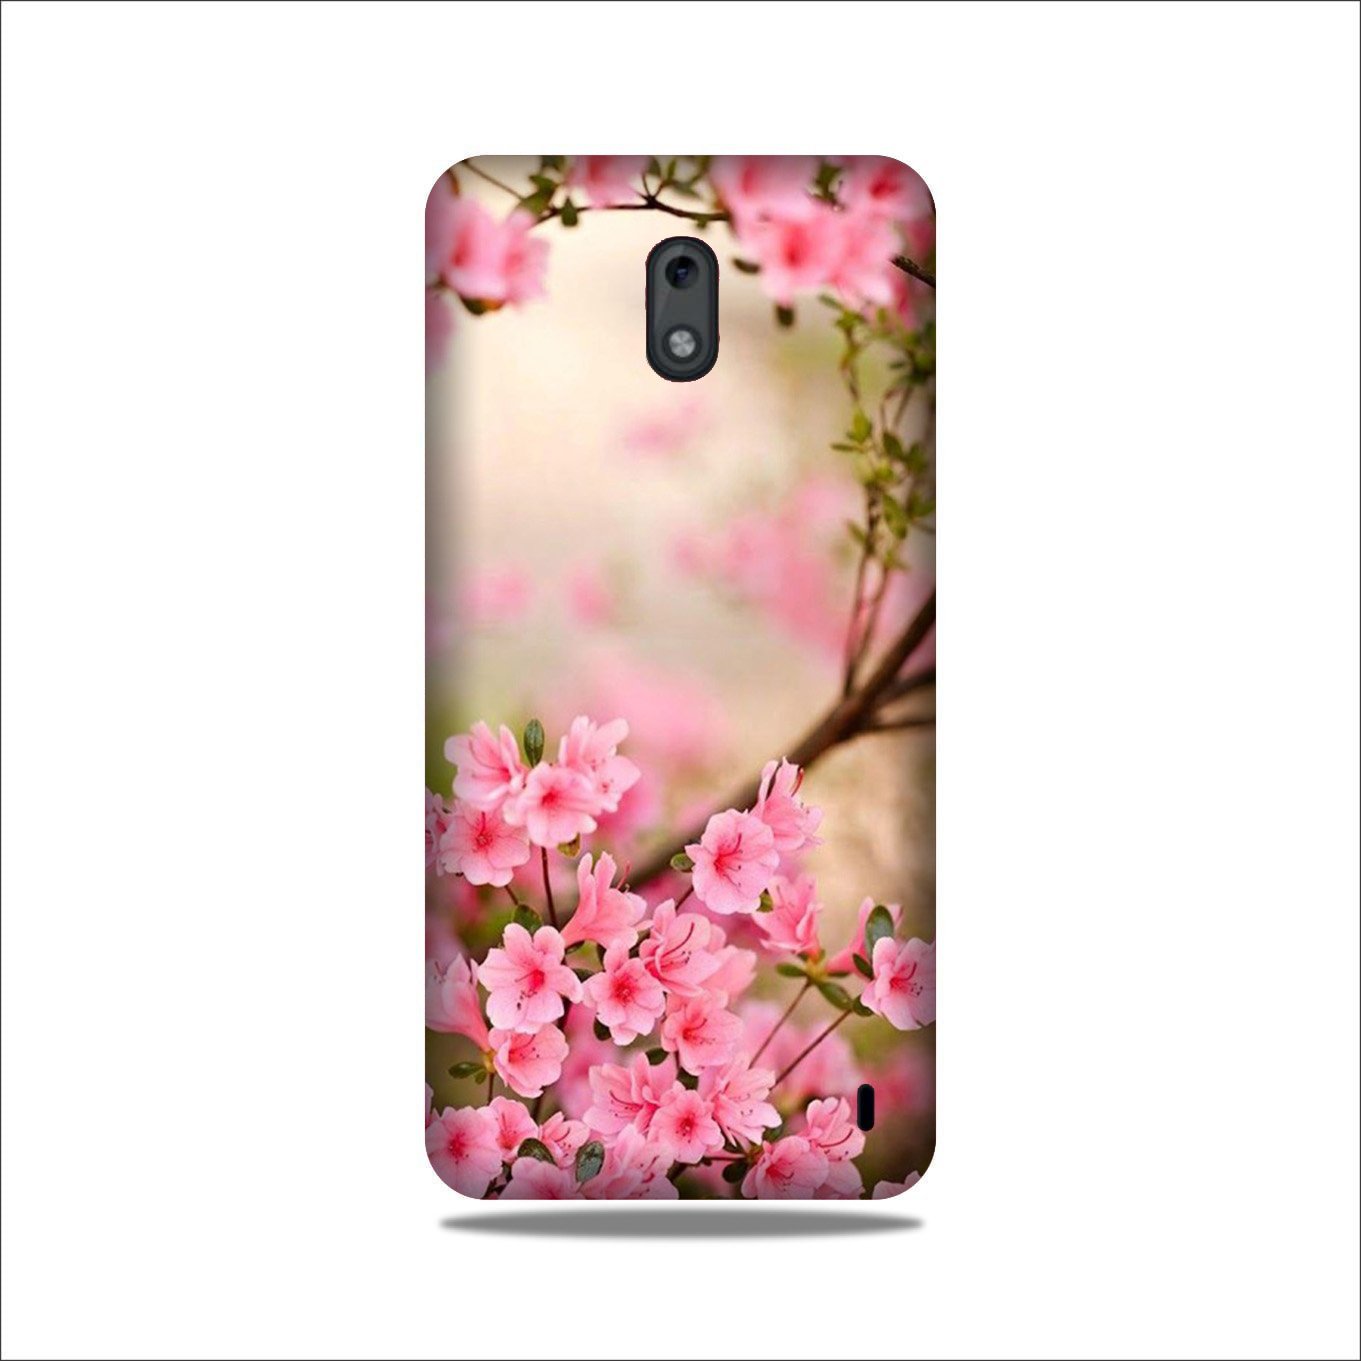 Pink flowers Case for Nokia 2